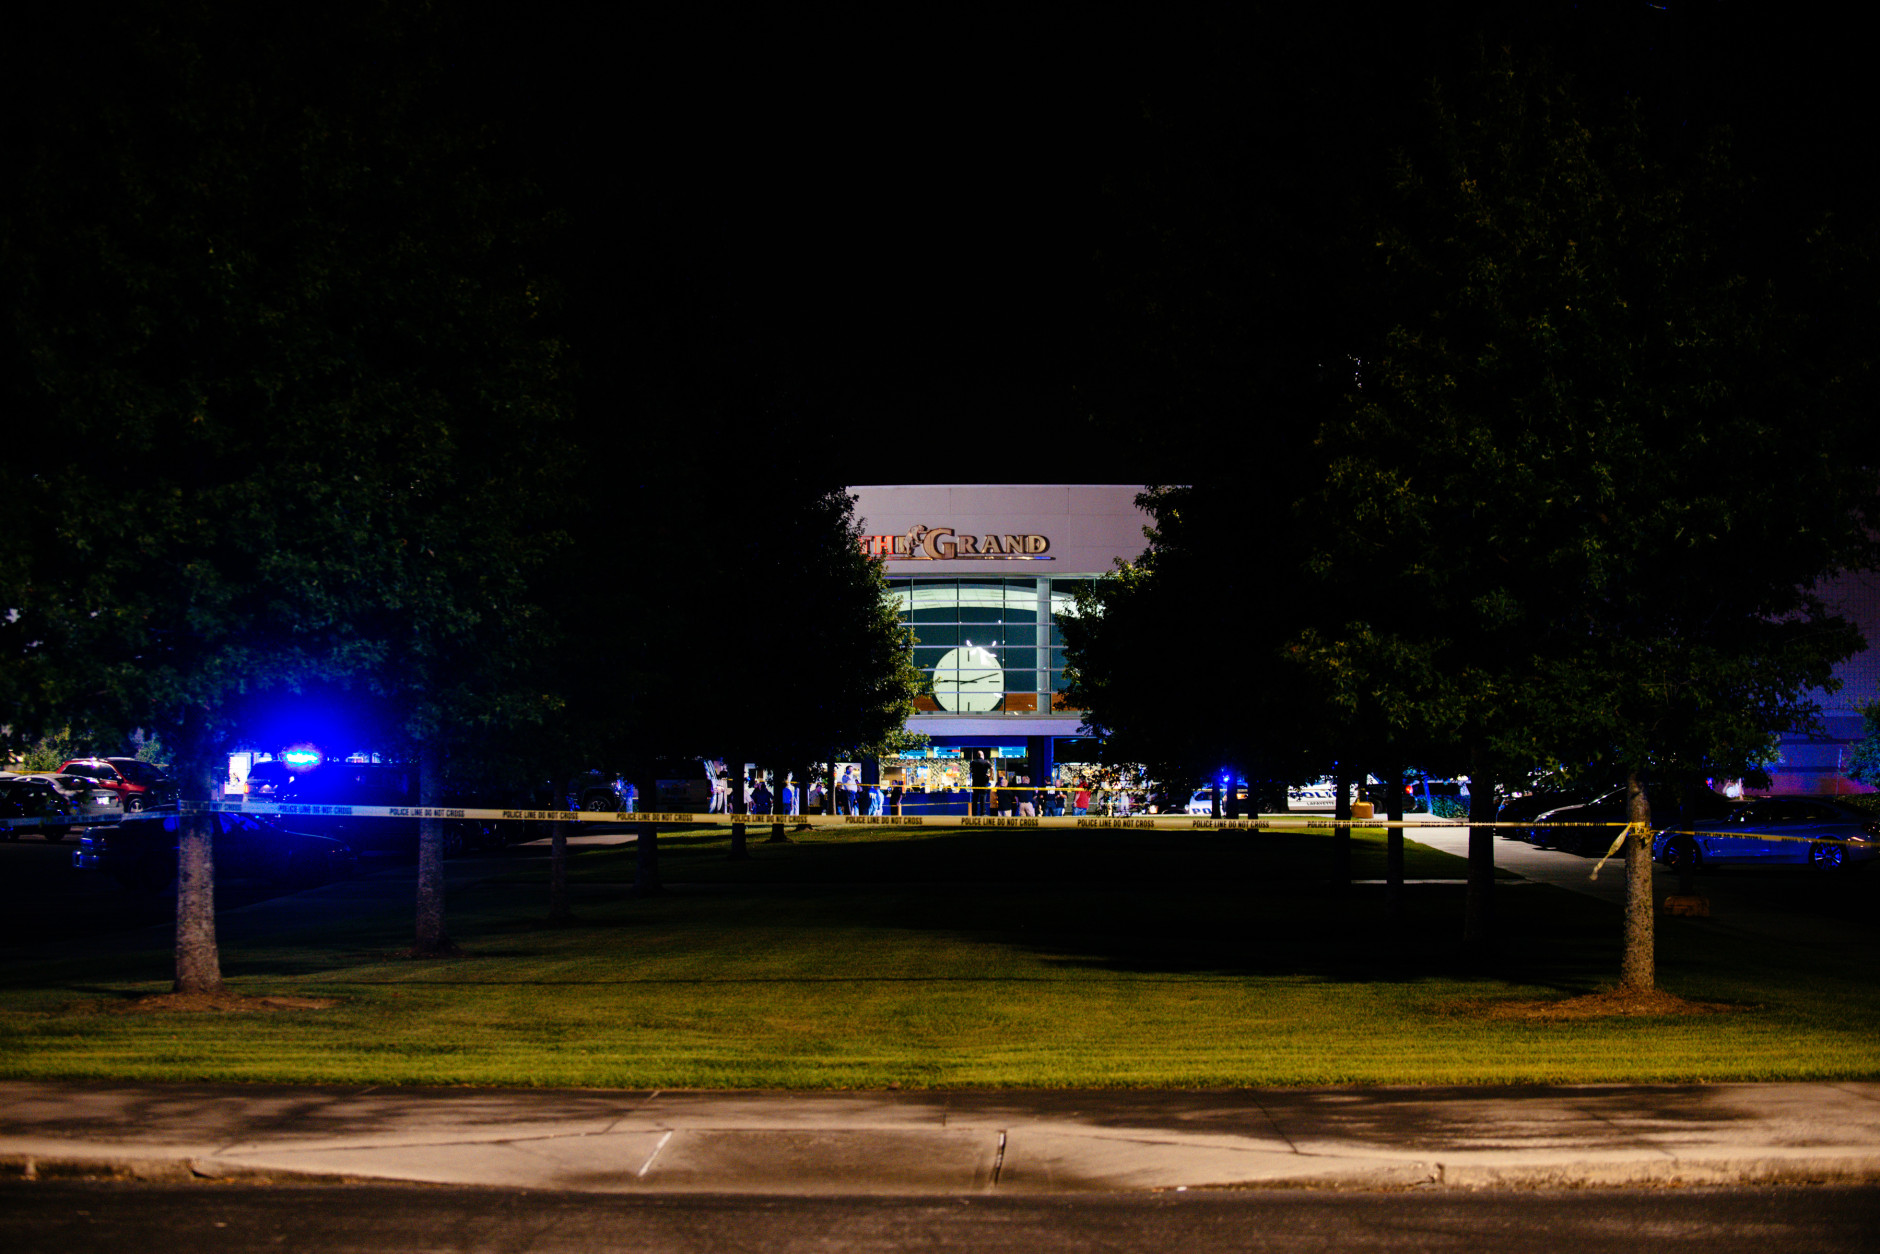 Police tape marls off the area of a deadly shooting at the Grand Theatre in Lafayette, La., Thursday, July 23, 2015. (AP Photo/Denny Culbert)